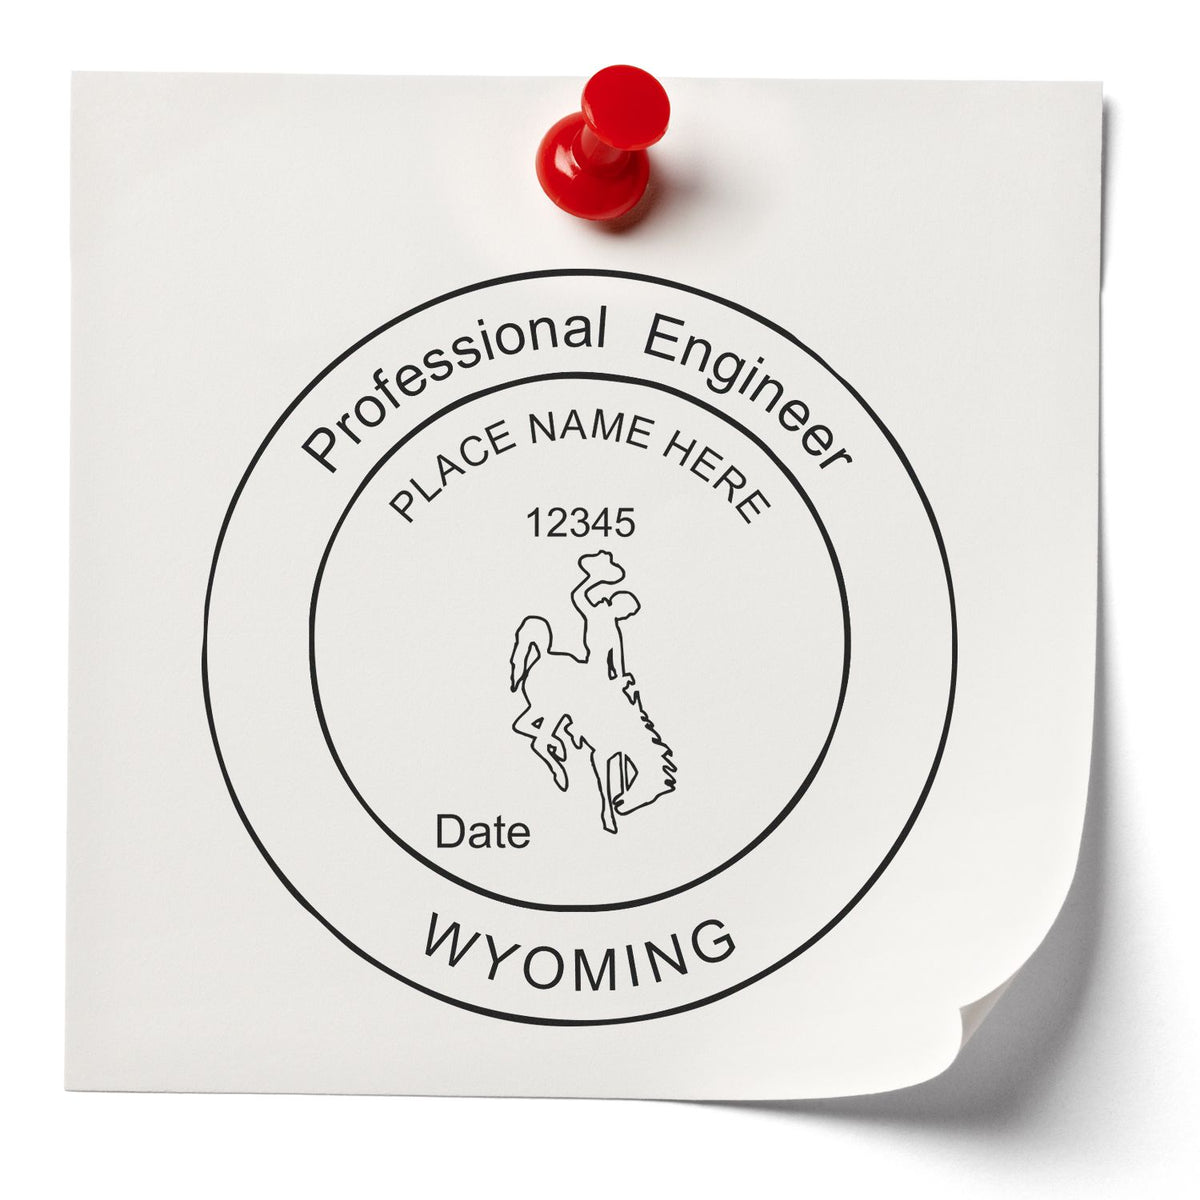 A lifestyle photo showing a stamped image of the Digital Wyoming PE Stamp and Electronic Seal for Wyoming Engineer on a piece of paper